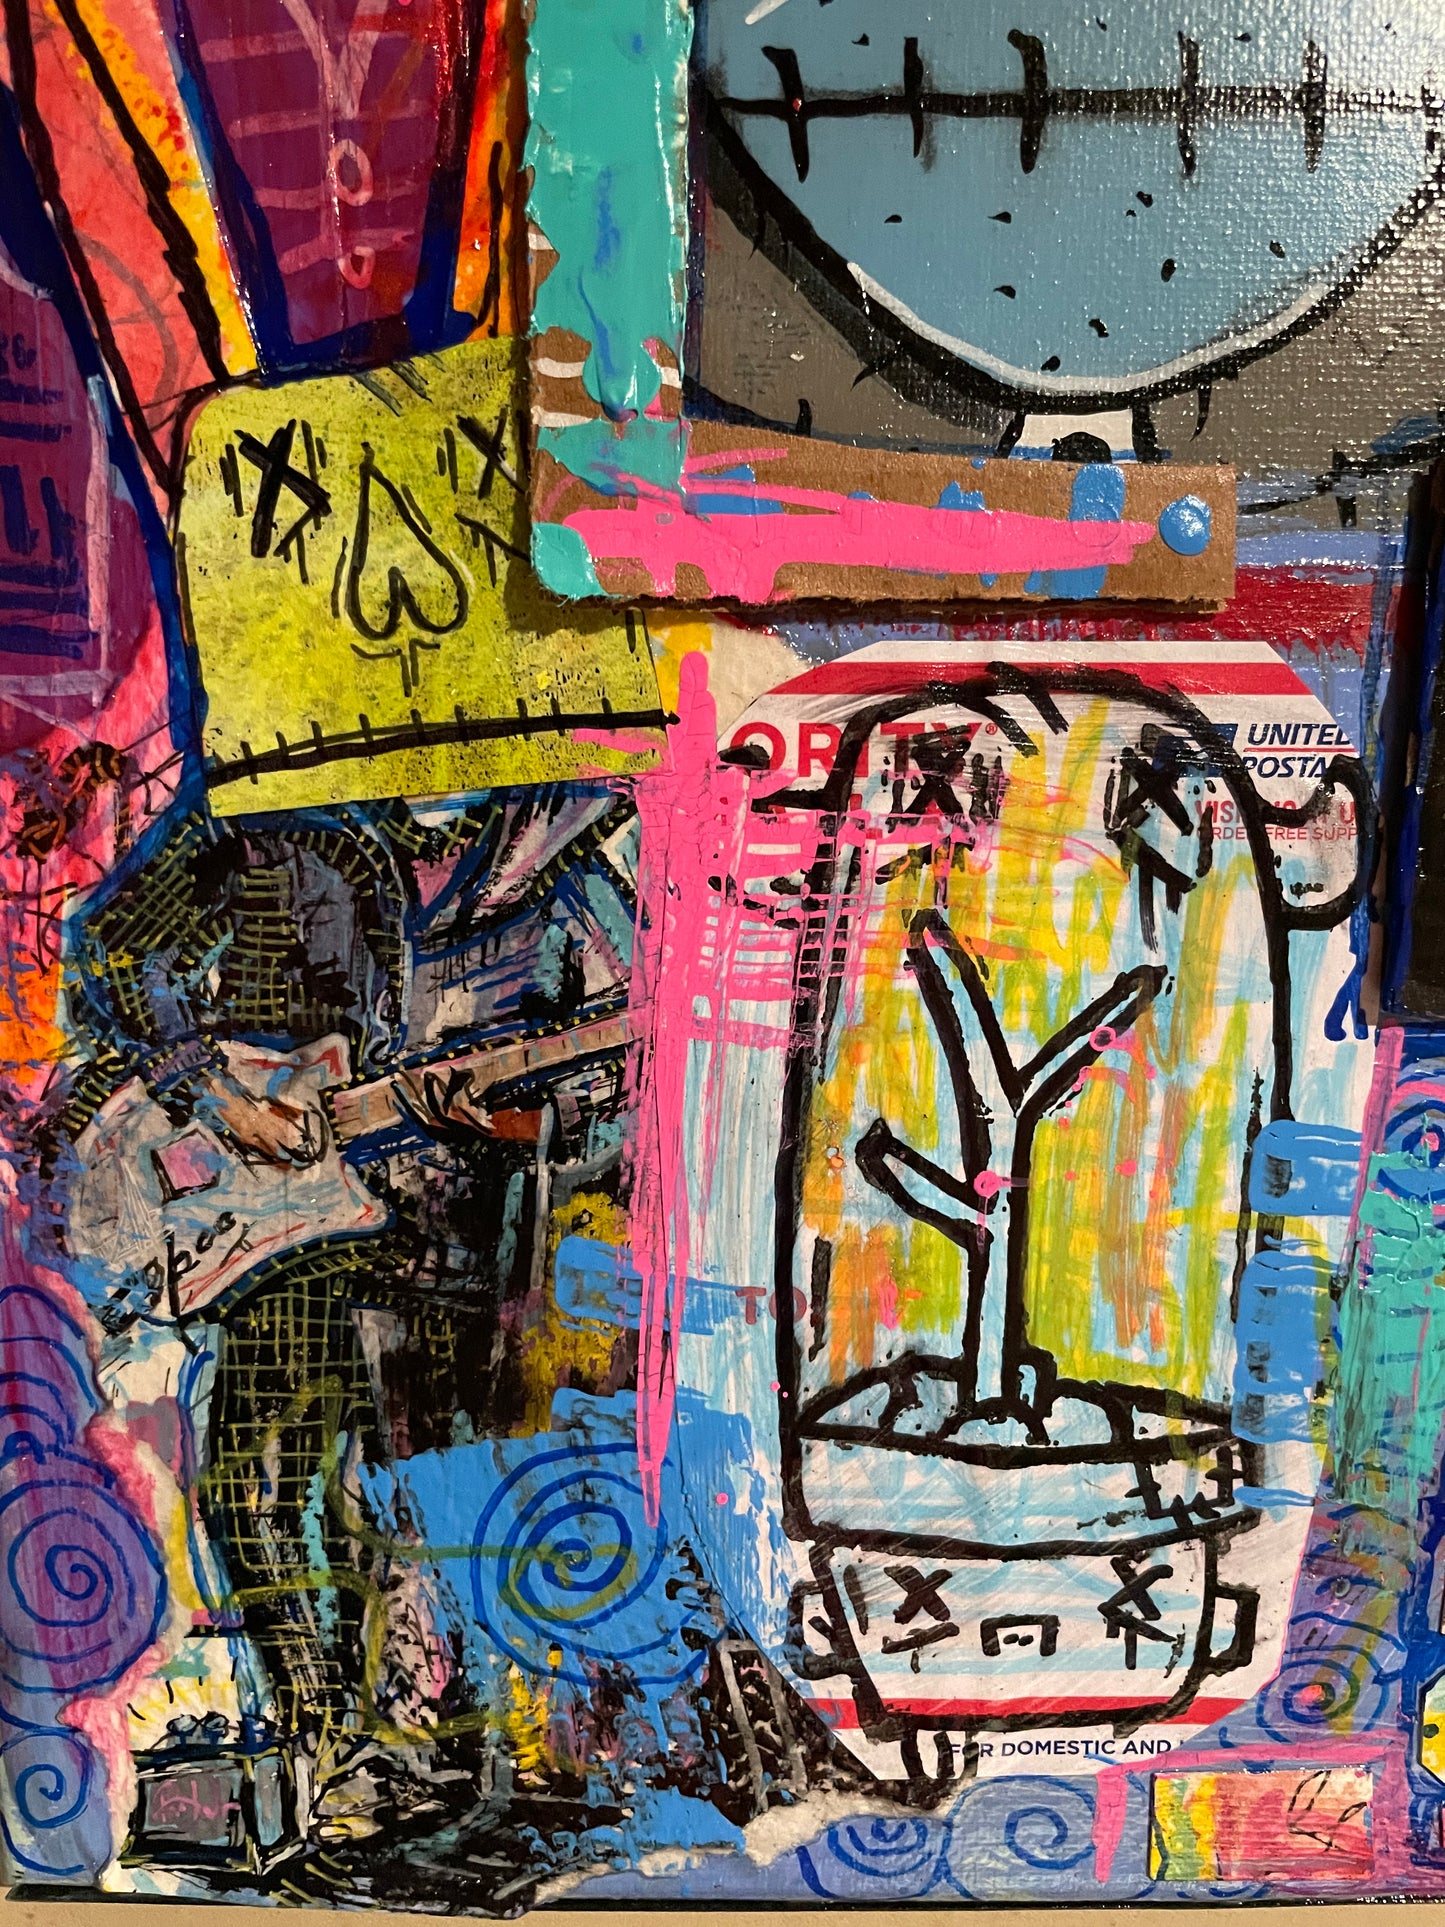 11in by 14in Mixed Media On Canvas. "Austin Buskers".